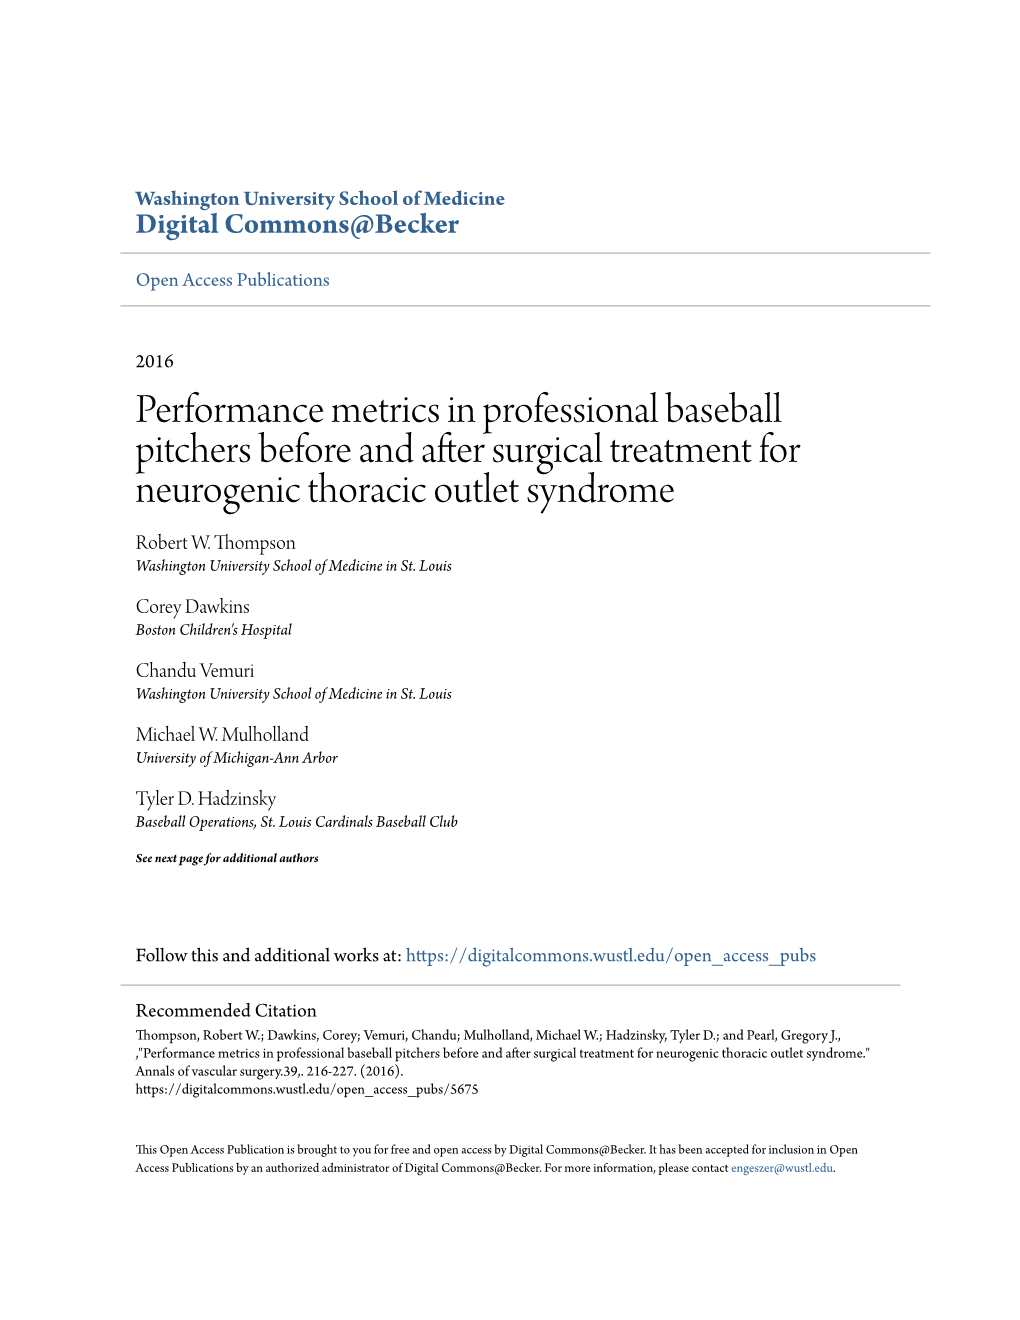 Performance Metrics in Professional Baseball Pitchers Before and After Surgical Treatment for Neurogenic Thoracic Outlet Syndrome Robert W